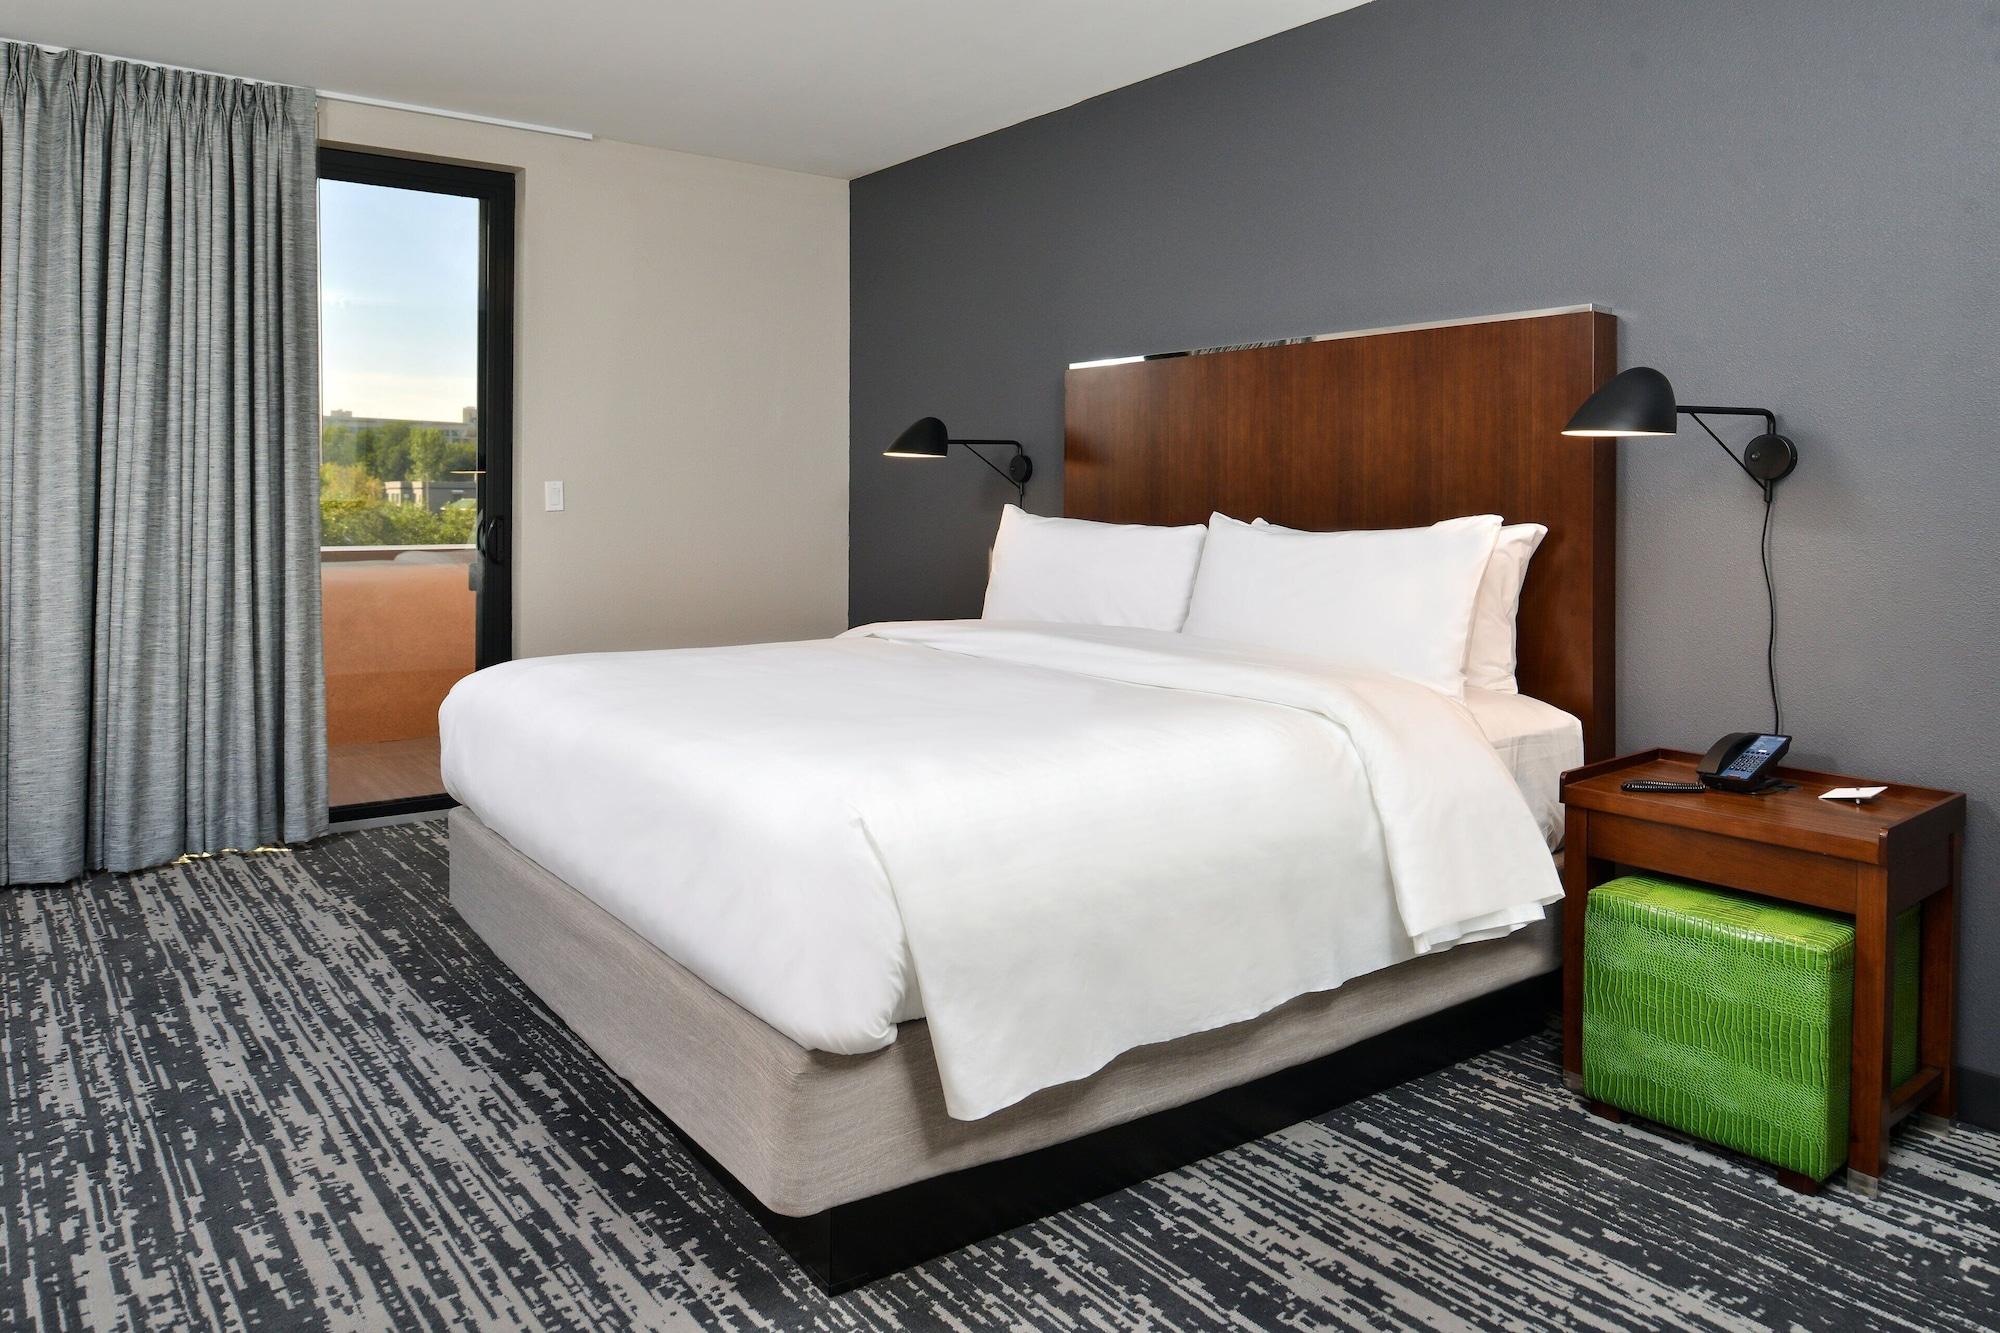 Four Points By Sheraton Omaha Midtown Экстерьер фото